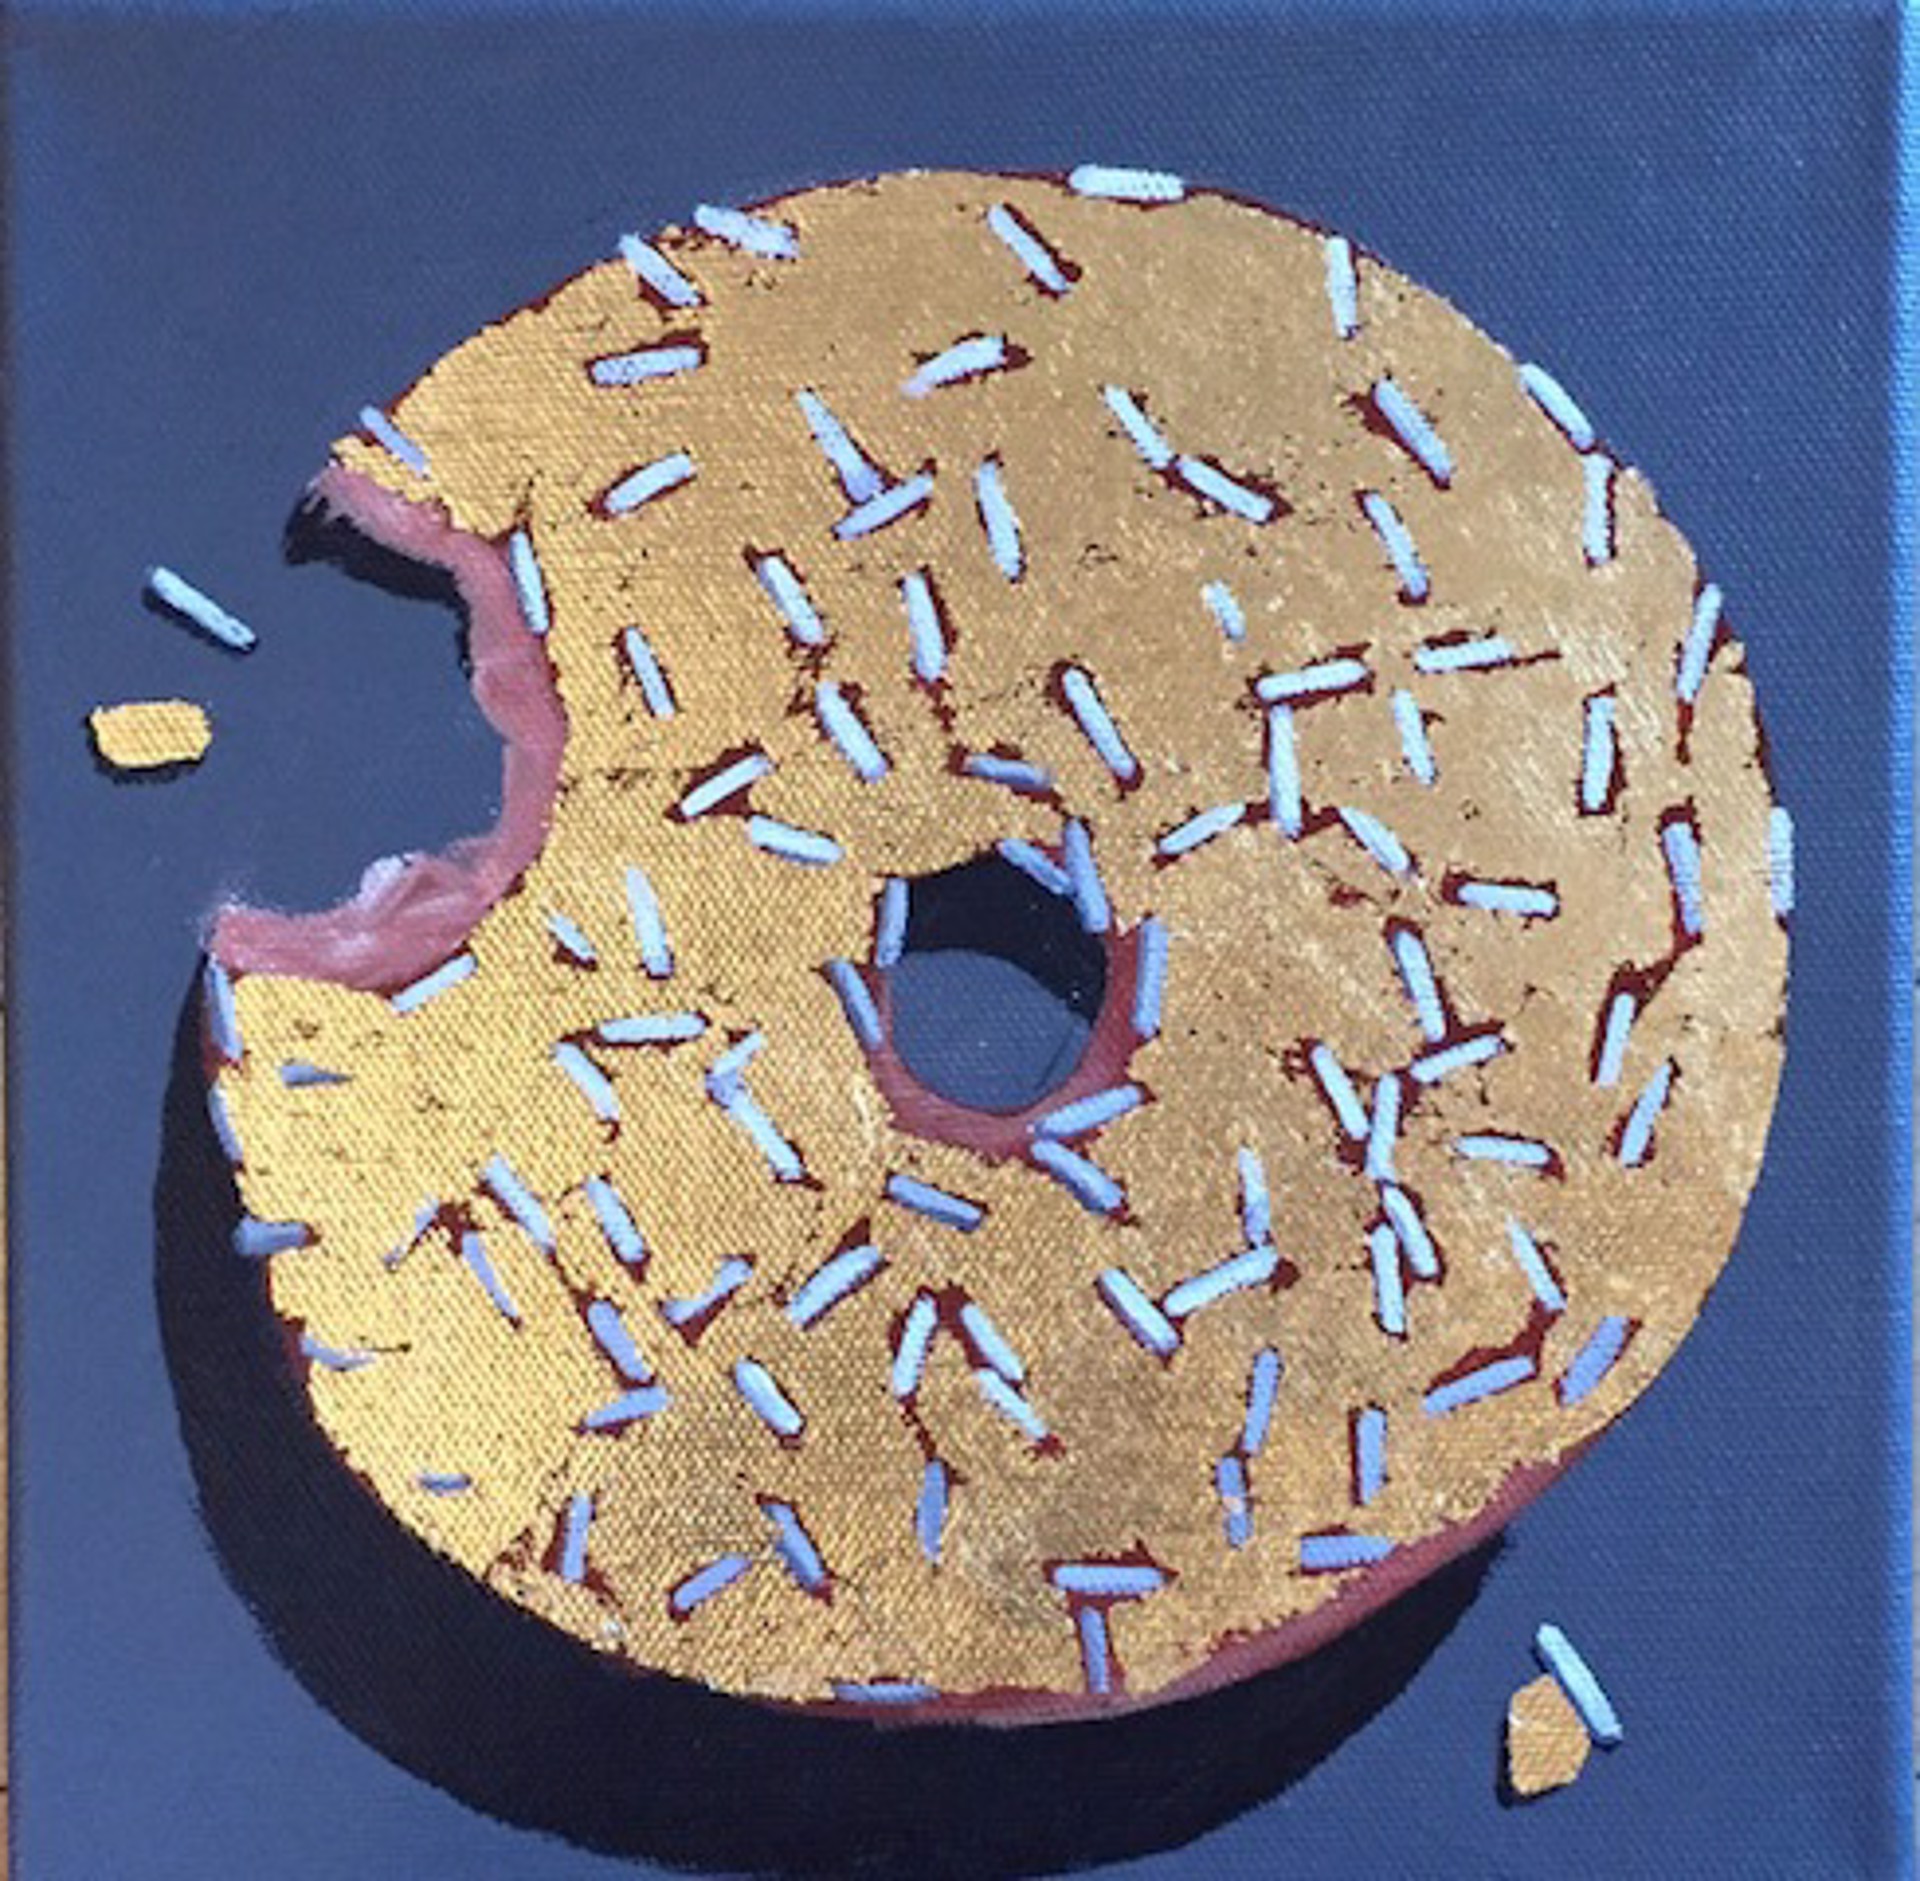 Gold Leaf with Sprinkles I by Terry Romero Paul